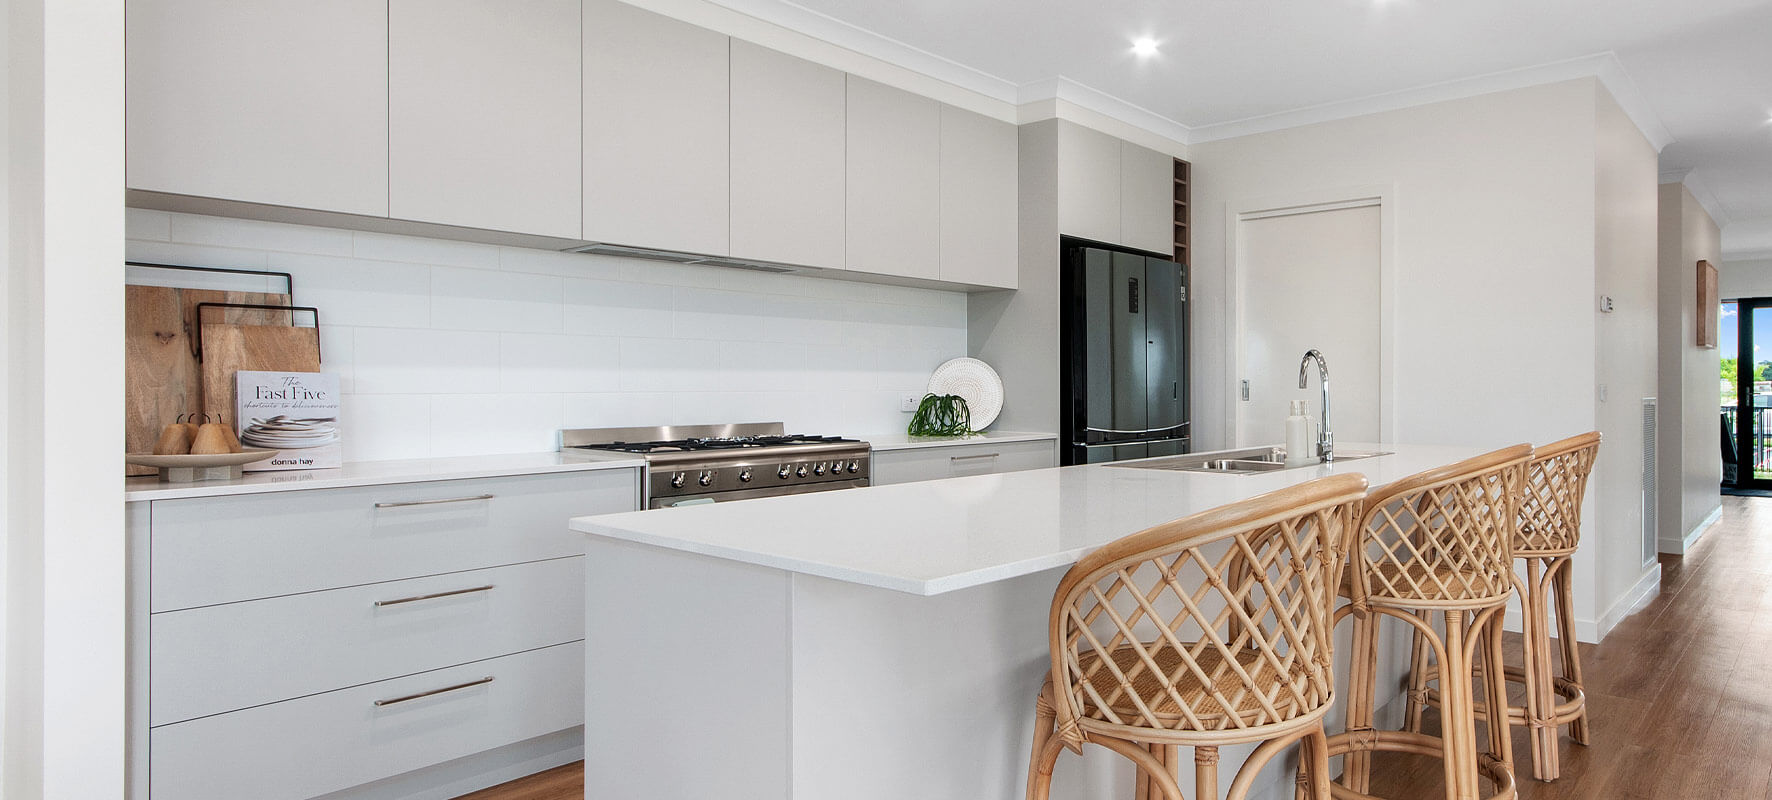 Photo of contemporary white and light grey kitchen, black fridge and cane stools at the island bench